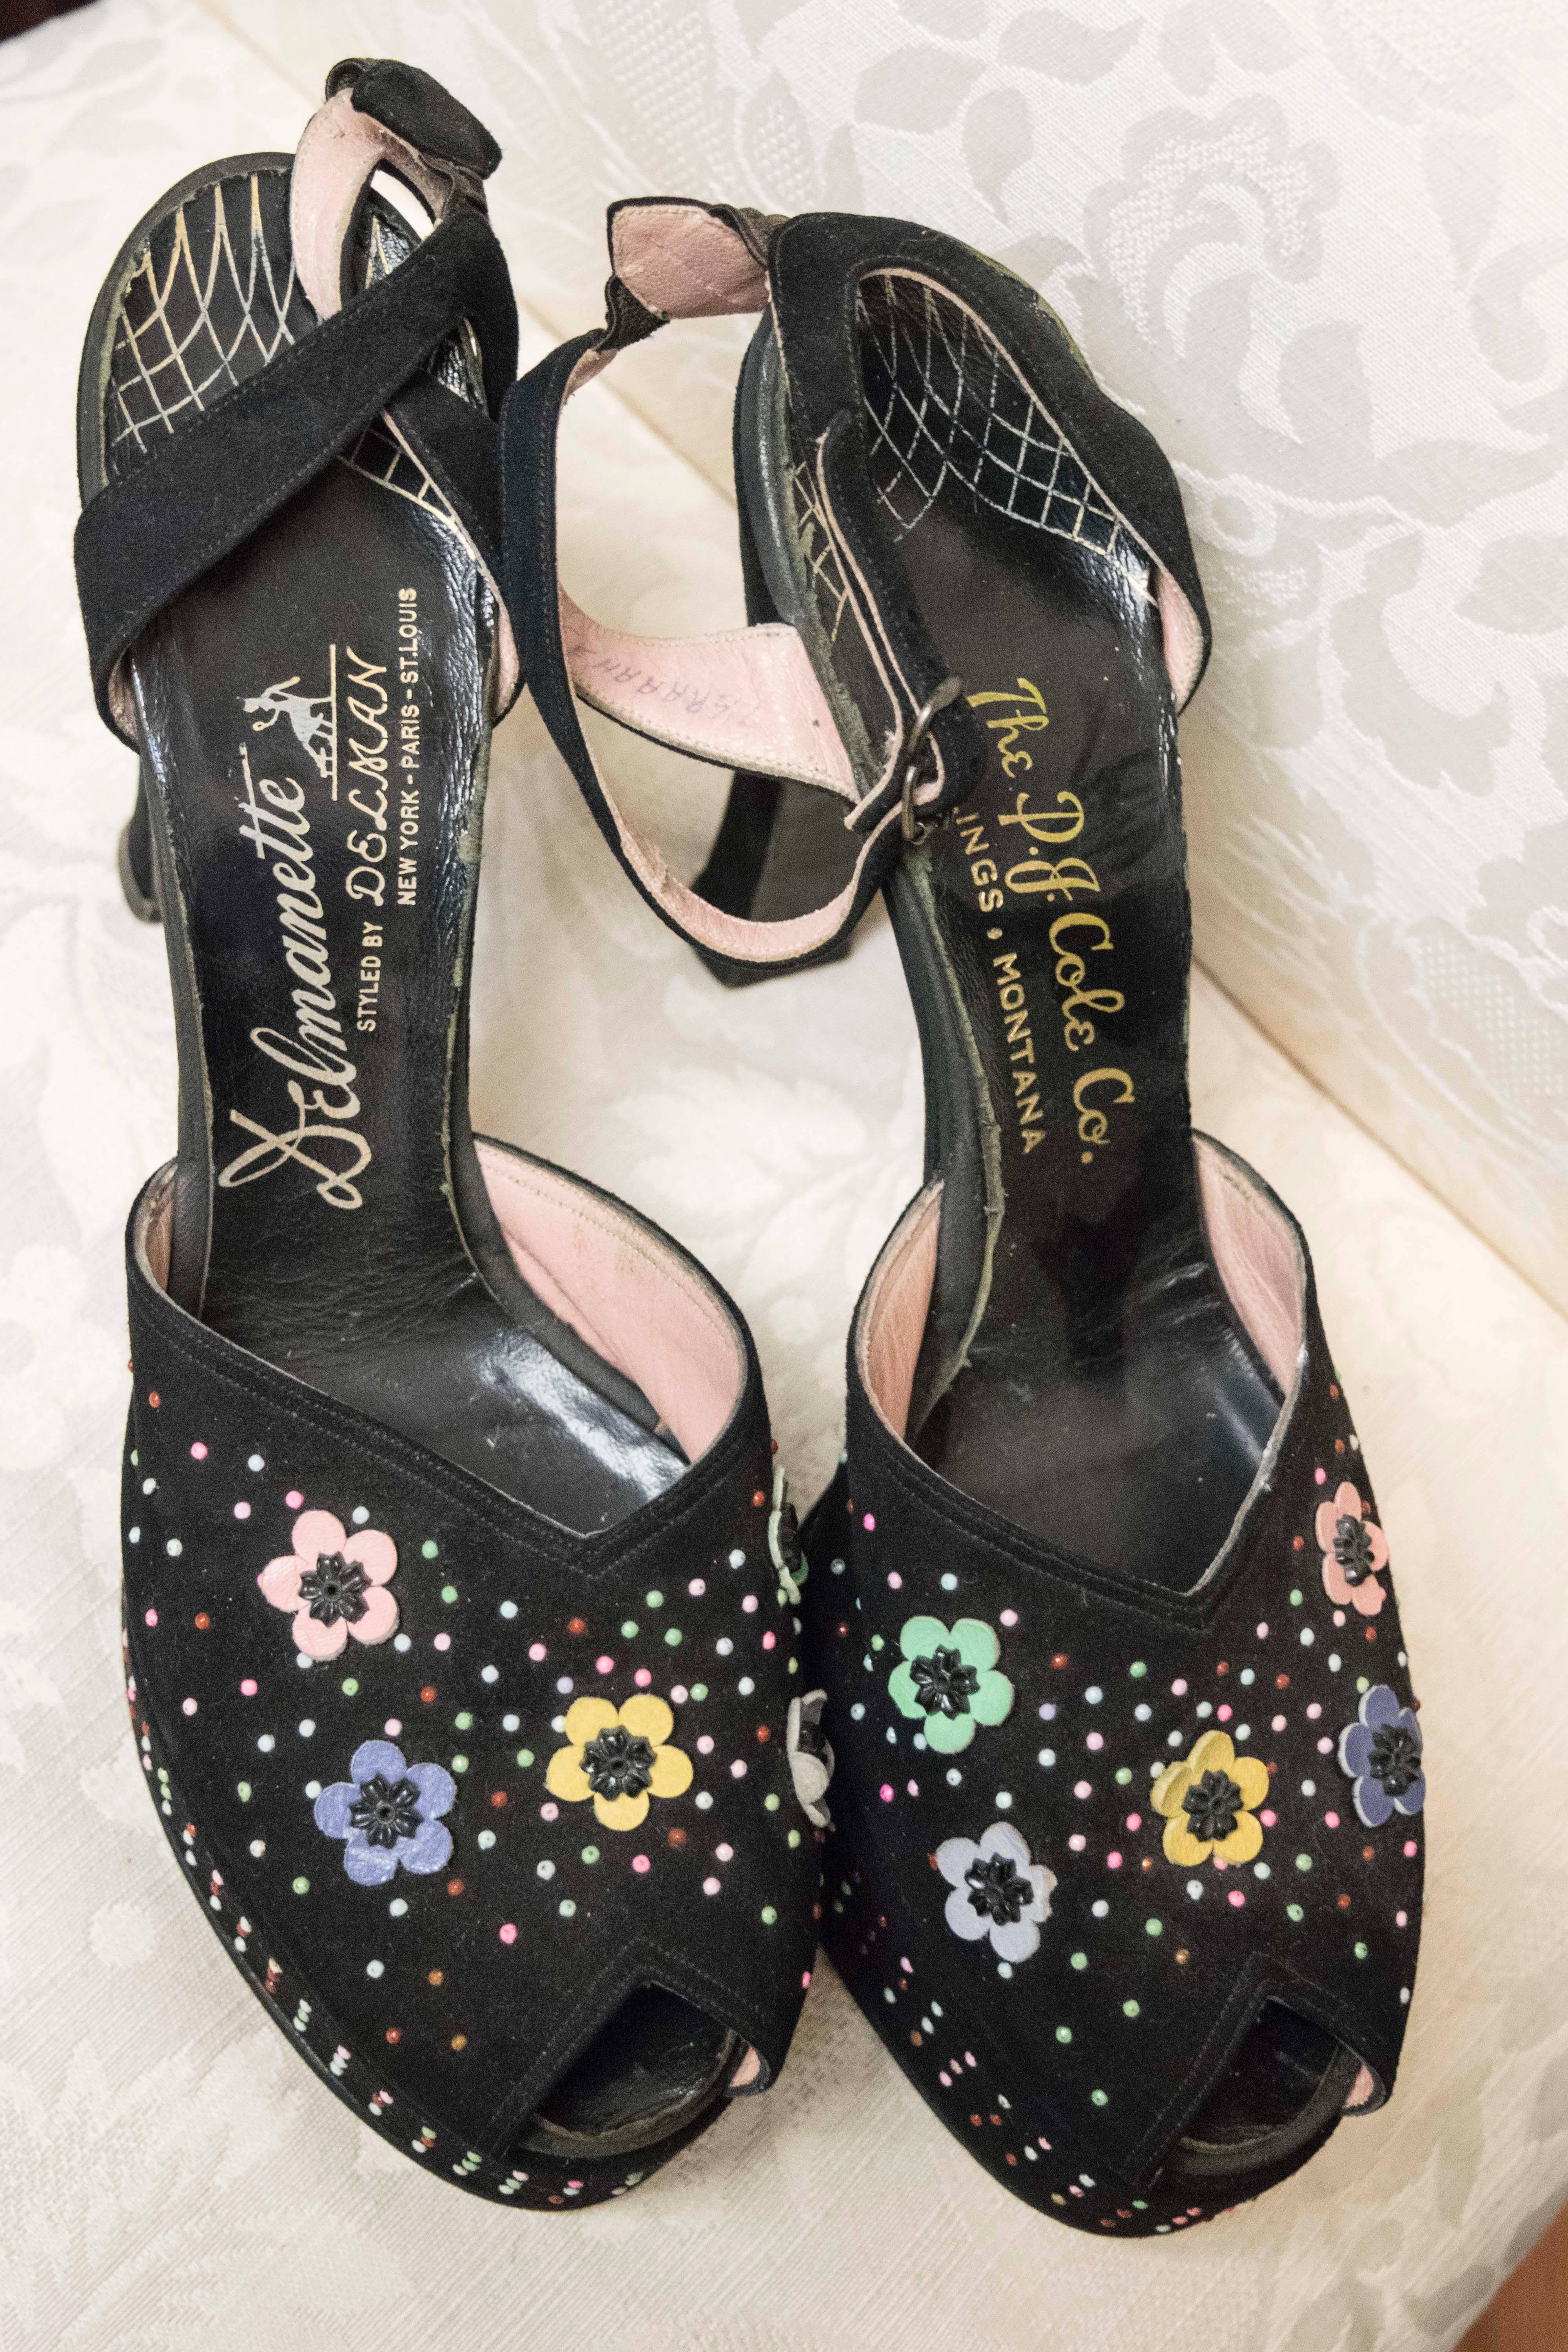 1940s Beaded Platform Shoes.

Beautiful cotton candy studded suede platform shoes. There are charming leather flowers details over the peep toe. They have an ankle strap and a leather soul. They are a great size, and are completely wearable.